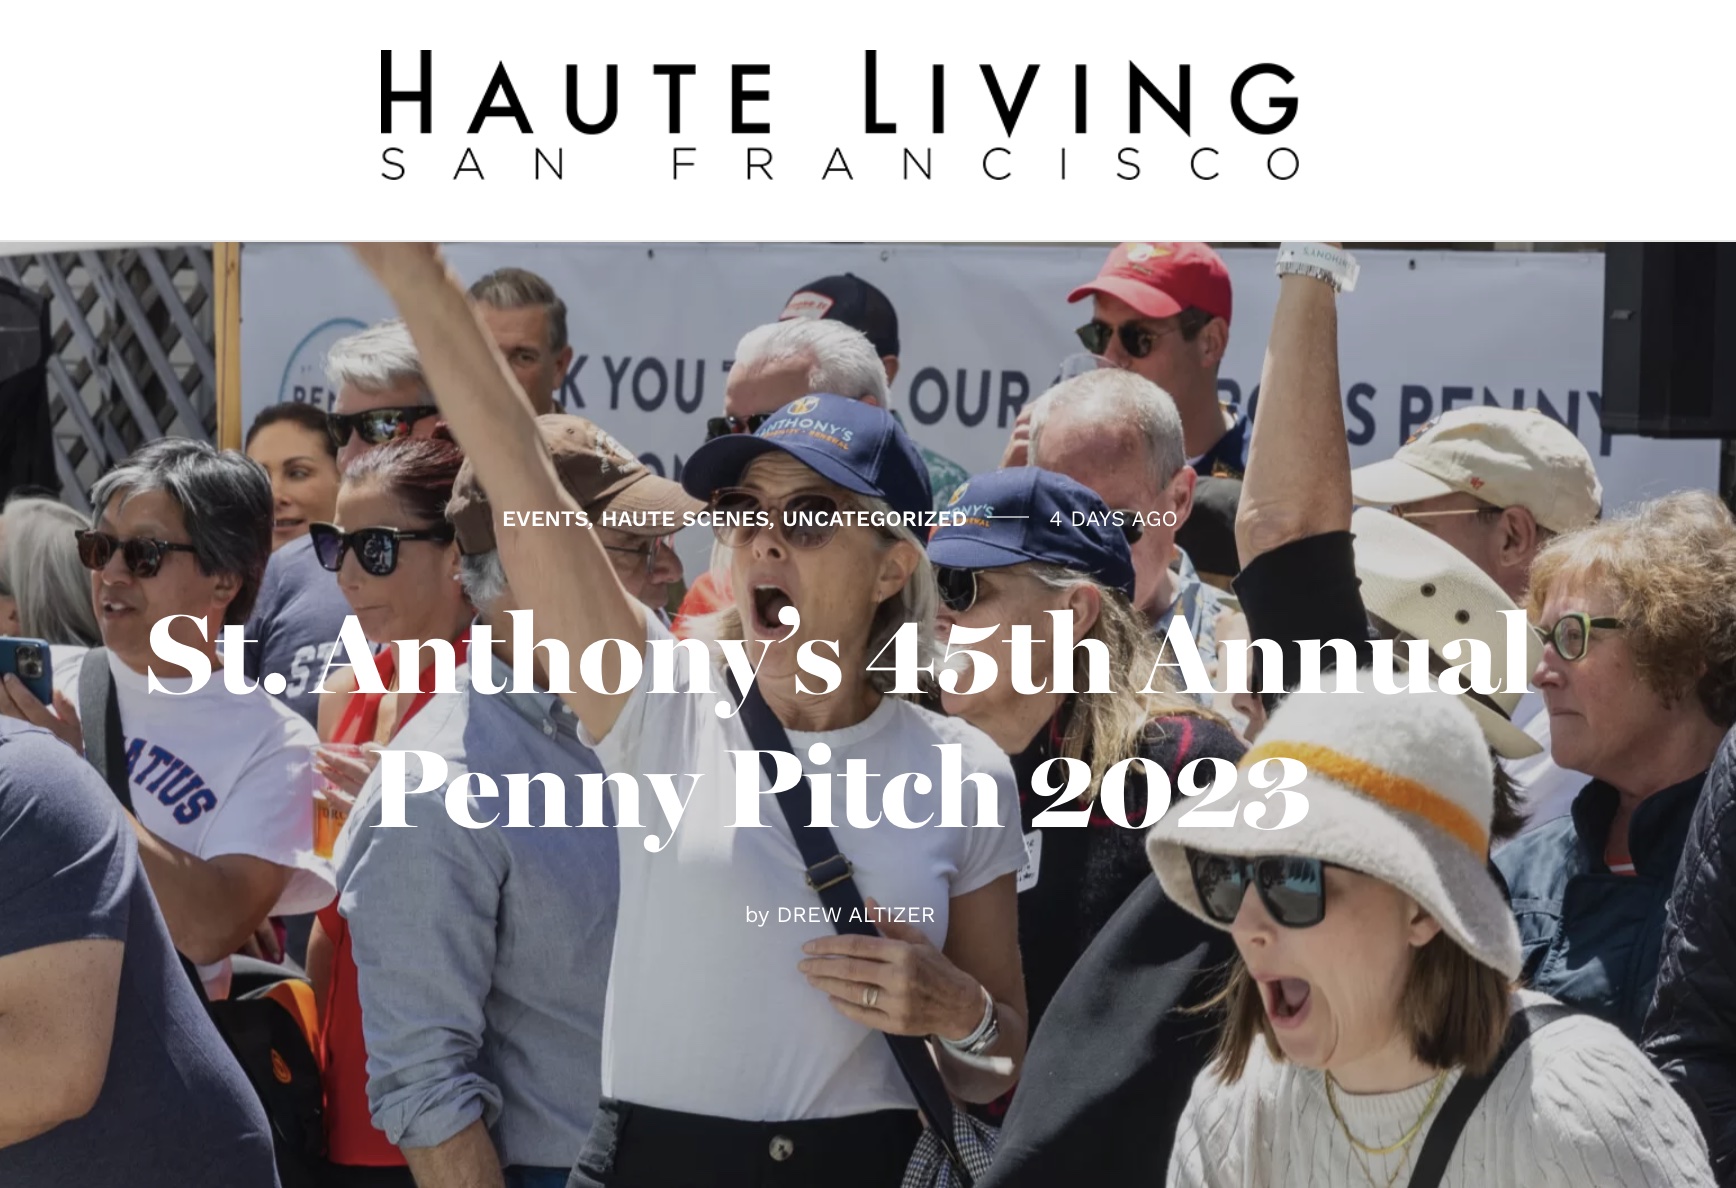 Haute Living: St. Anthony’s 45th Annual Penny Pitch 2023